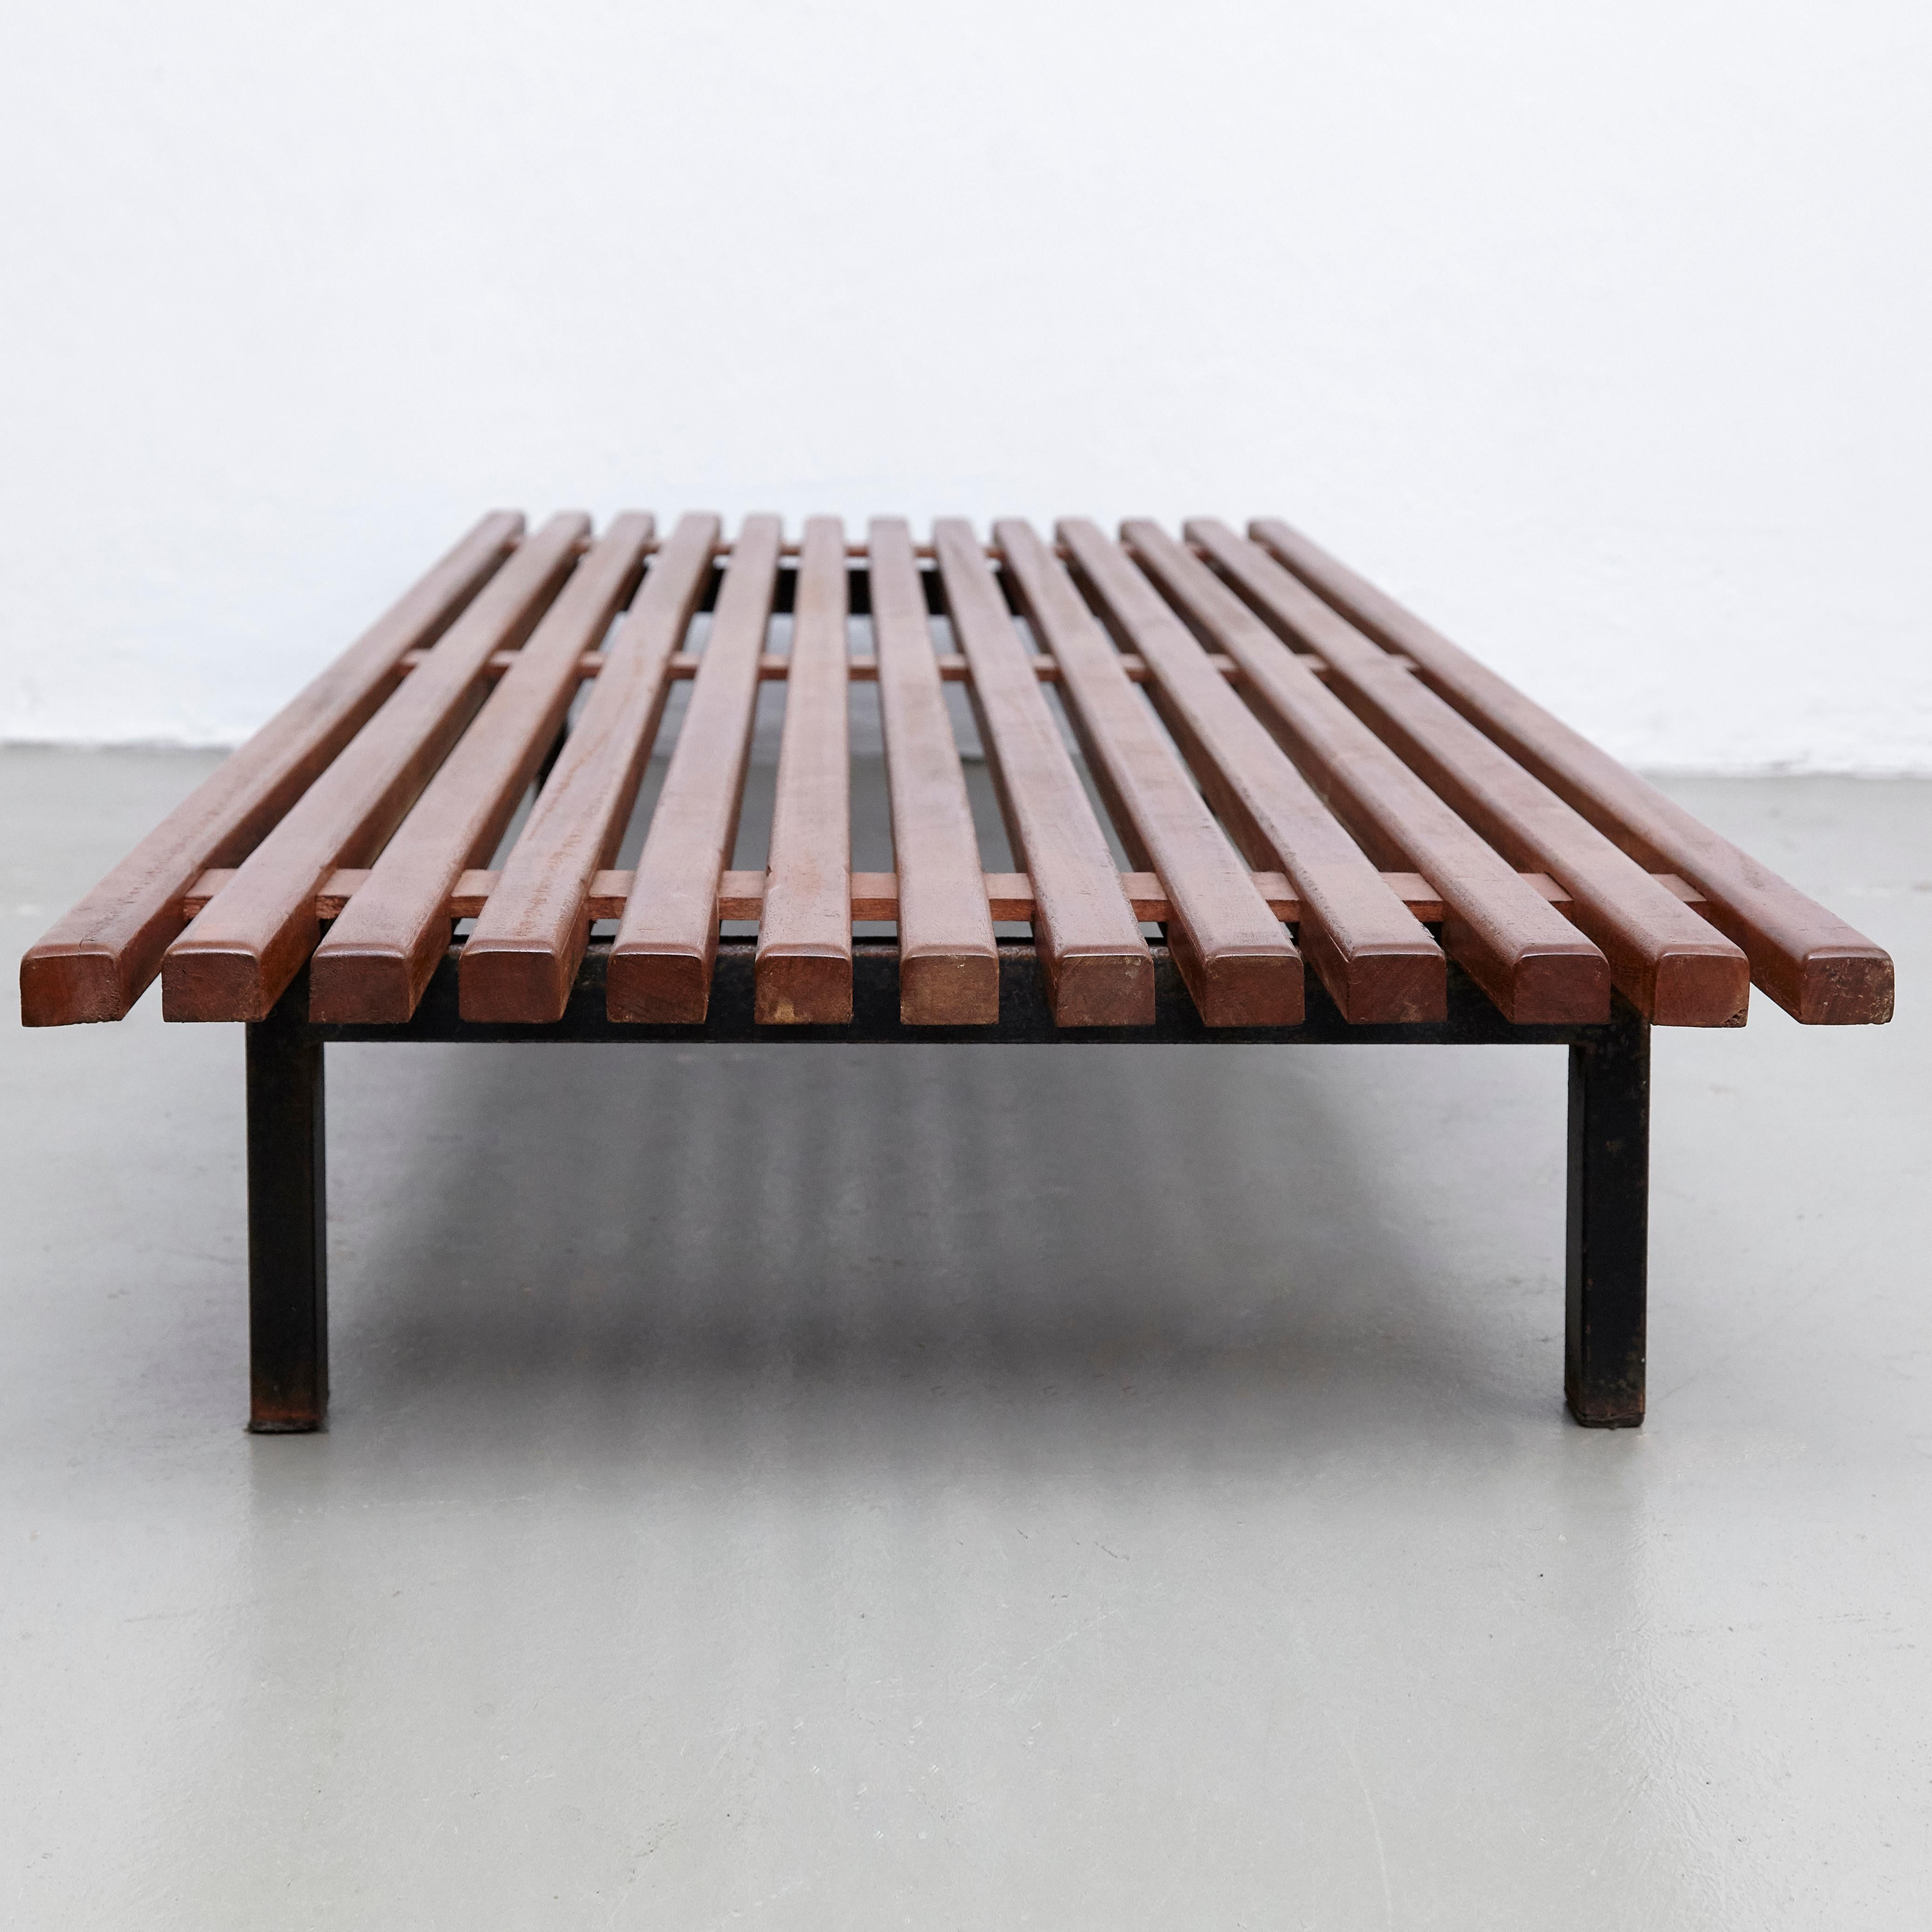 Bench designed by Charlotte Perriand, circa 1950.
Edited by Steph Simon (France)

Wood, metal frame legs.

Provenance: Cansado, Mauritania (Africa).

In original condition, with minor wear consistent with age and use, preserving a beautiful